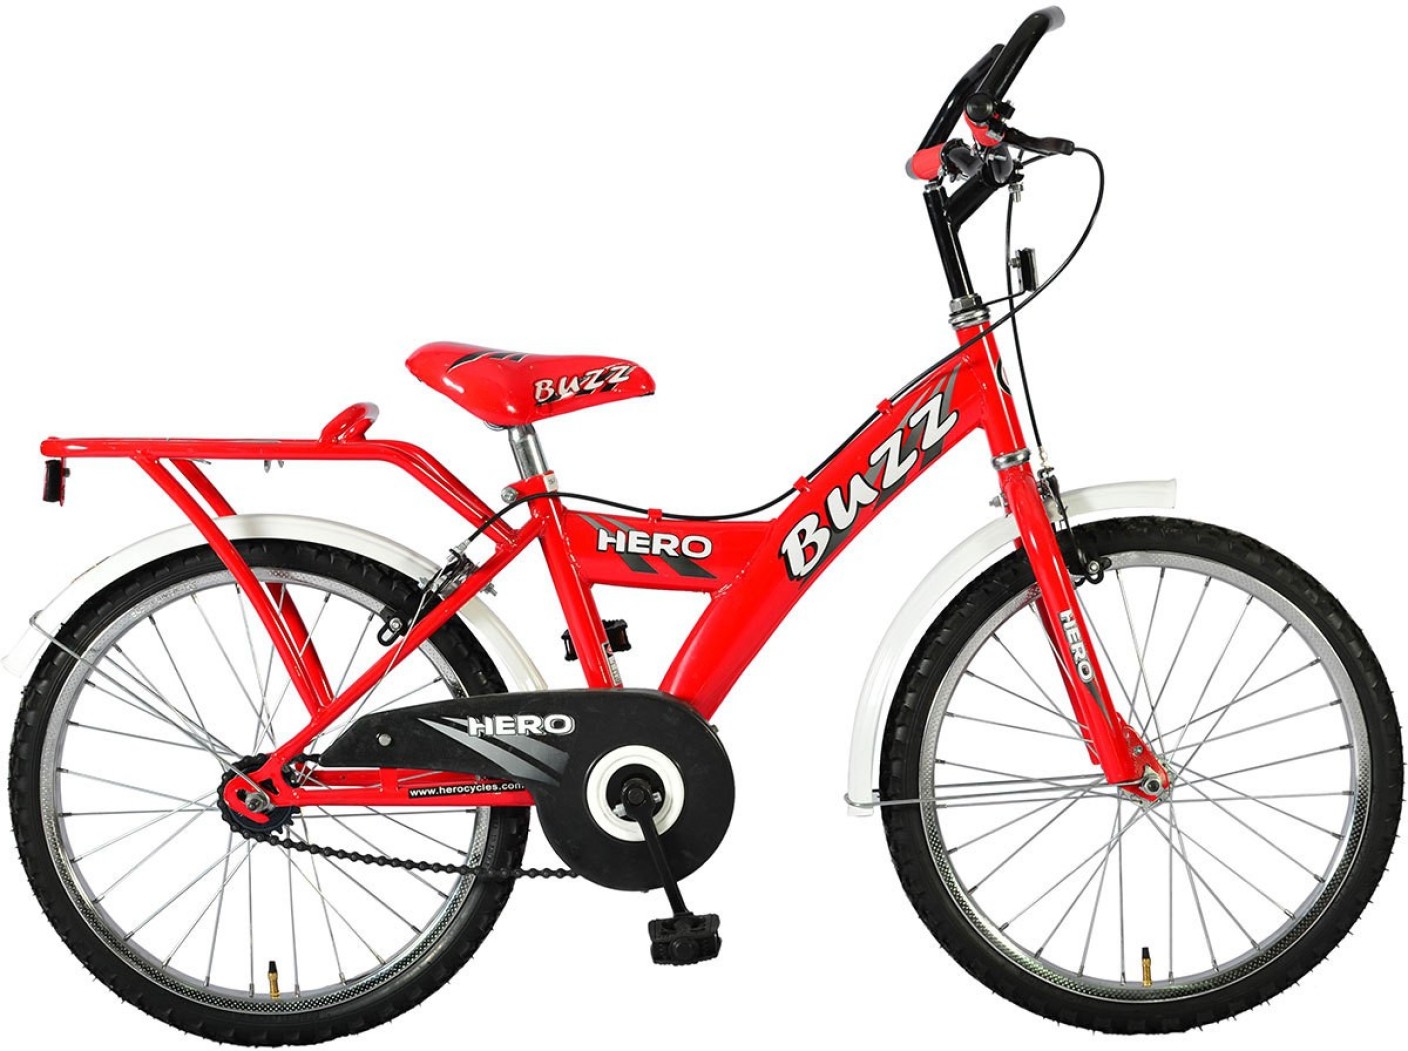 Hero Buzz 20T 20 T Single Speed Road Cycle Price in India - Buy Hero Buzz 20T 20 T Single Speed 